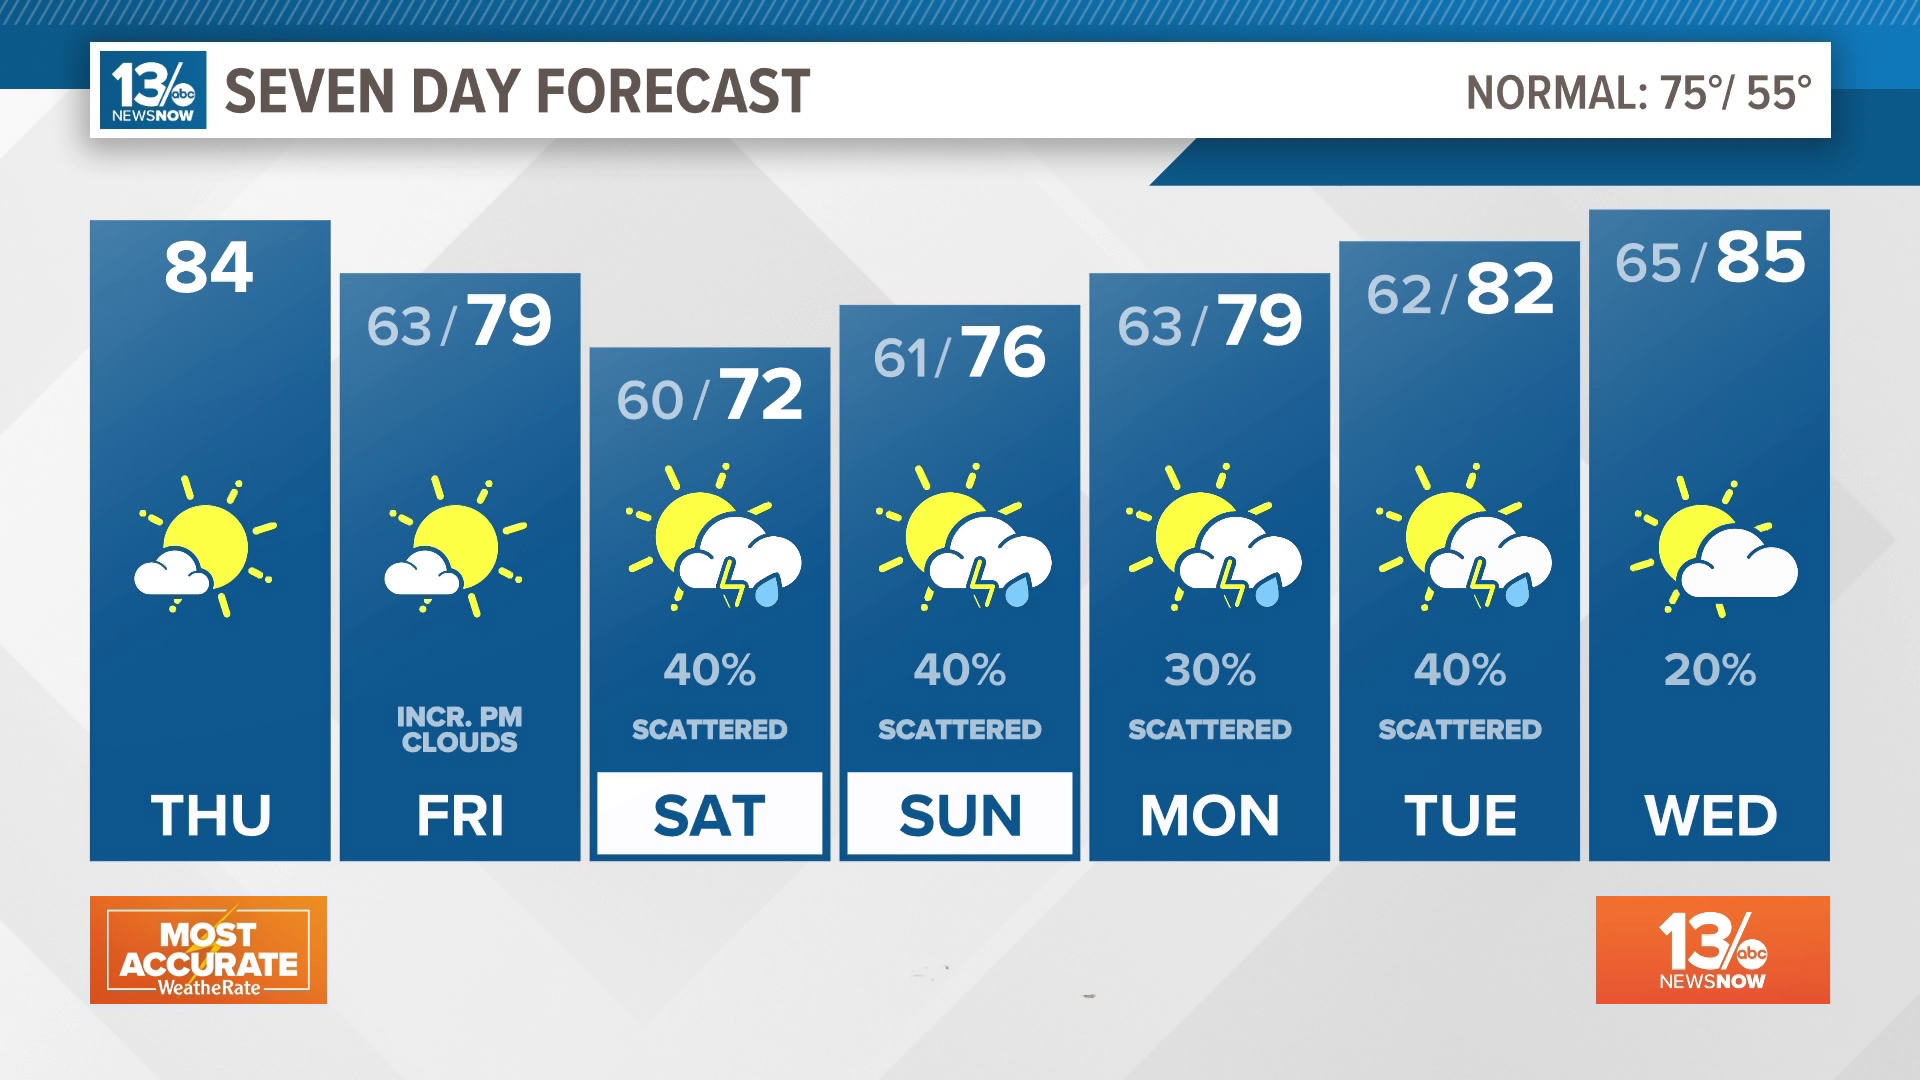 Scattered showers and storms will likely develop this weekend.